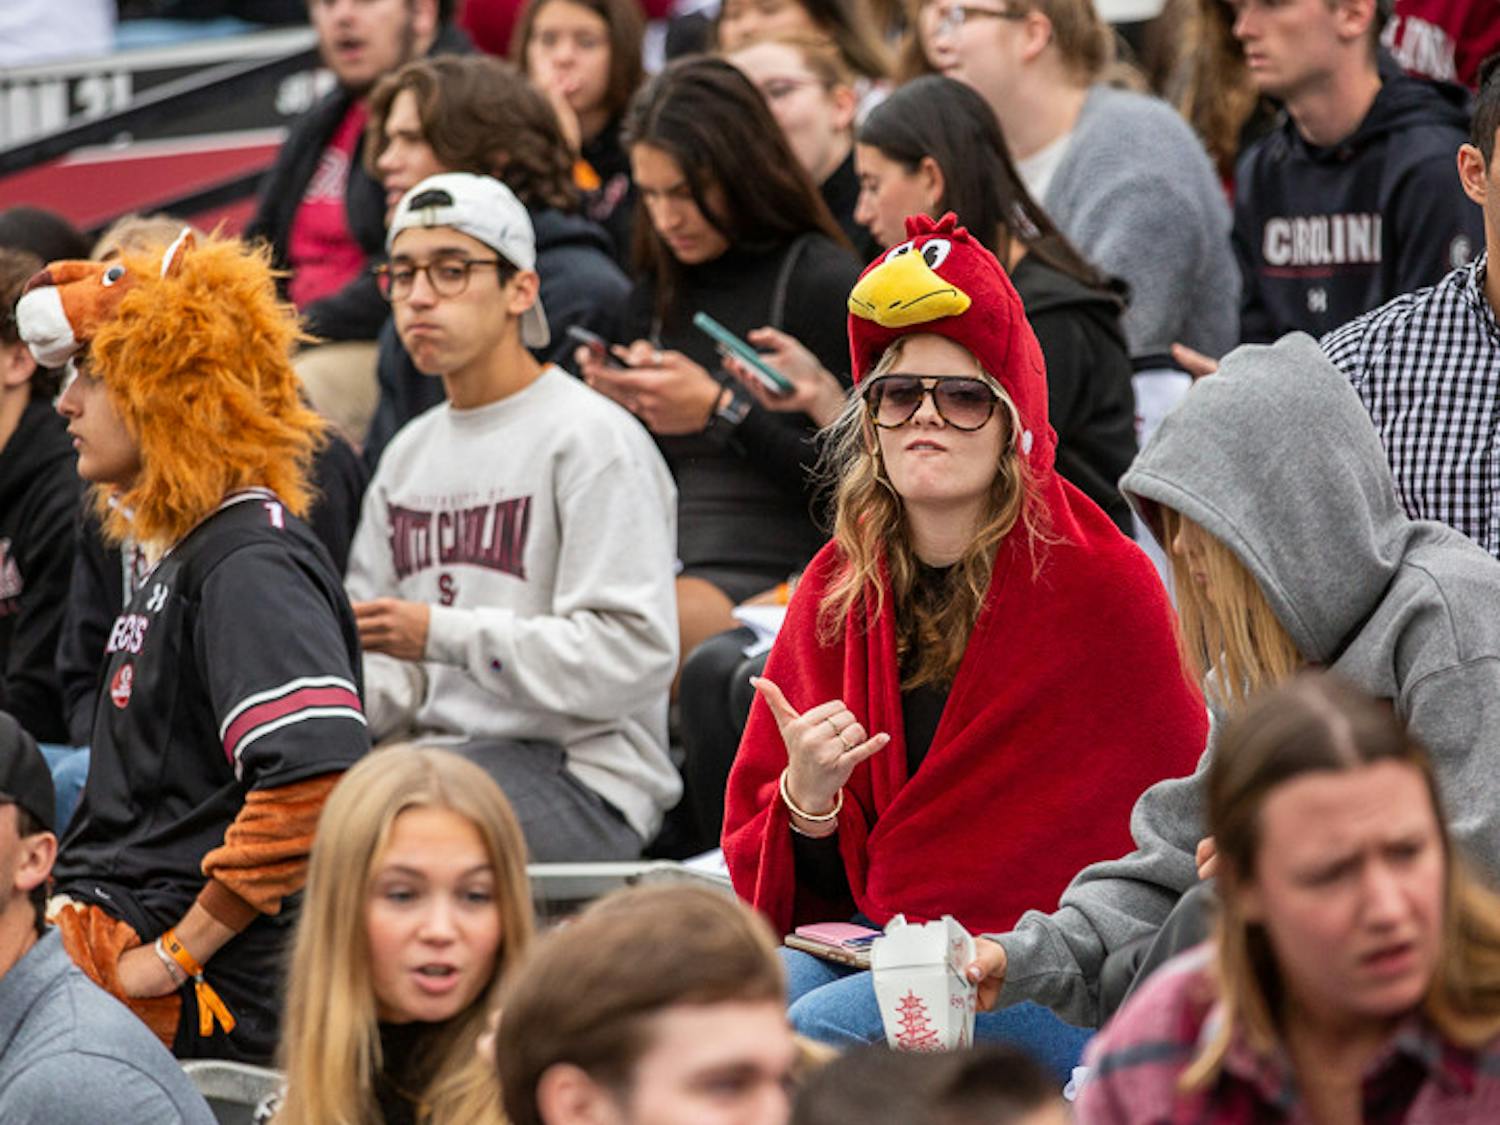 Second-year public health student Blakely Paradis wears a Cocky costume during the South Carolina and Missouri game on Oct. 29, 2022. The game fell on the weekend of Halloween, prompting many students to dawn their costumes for the game.&nbsp;